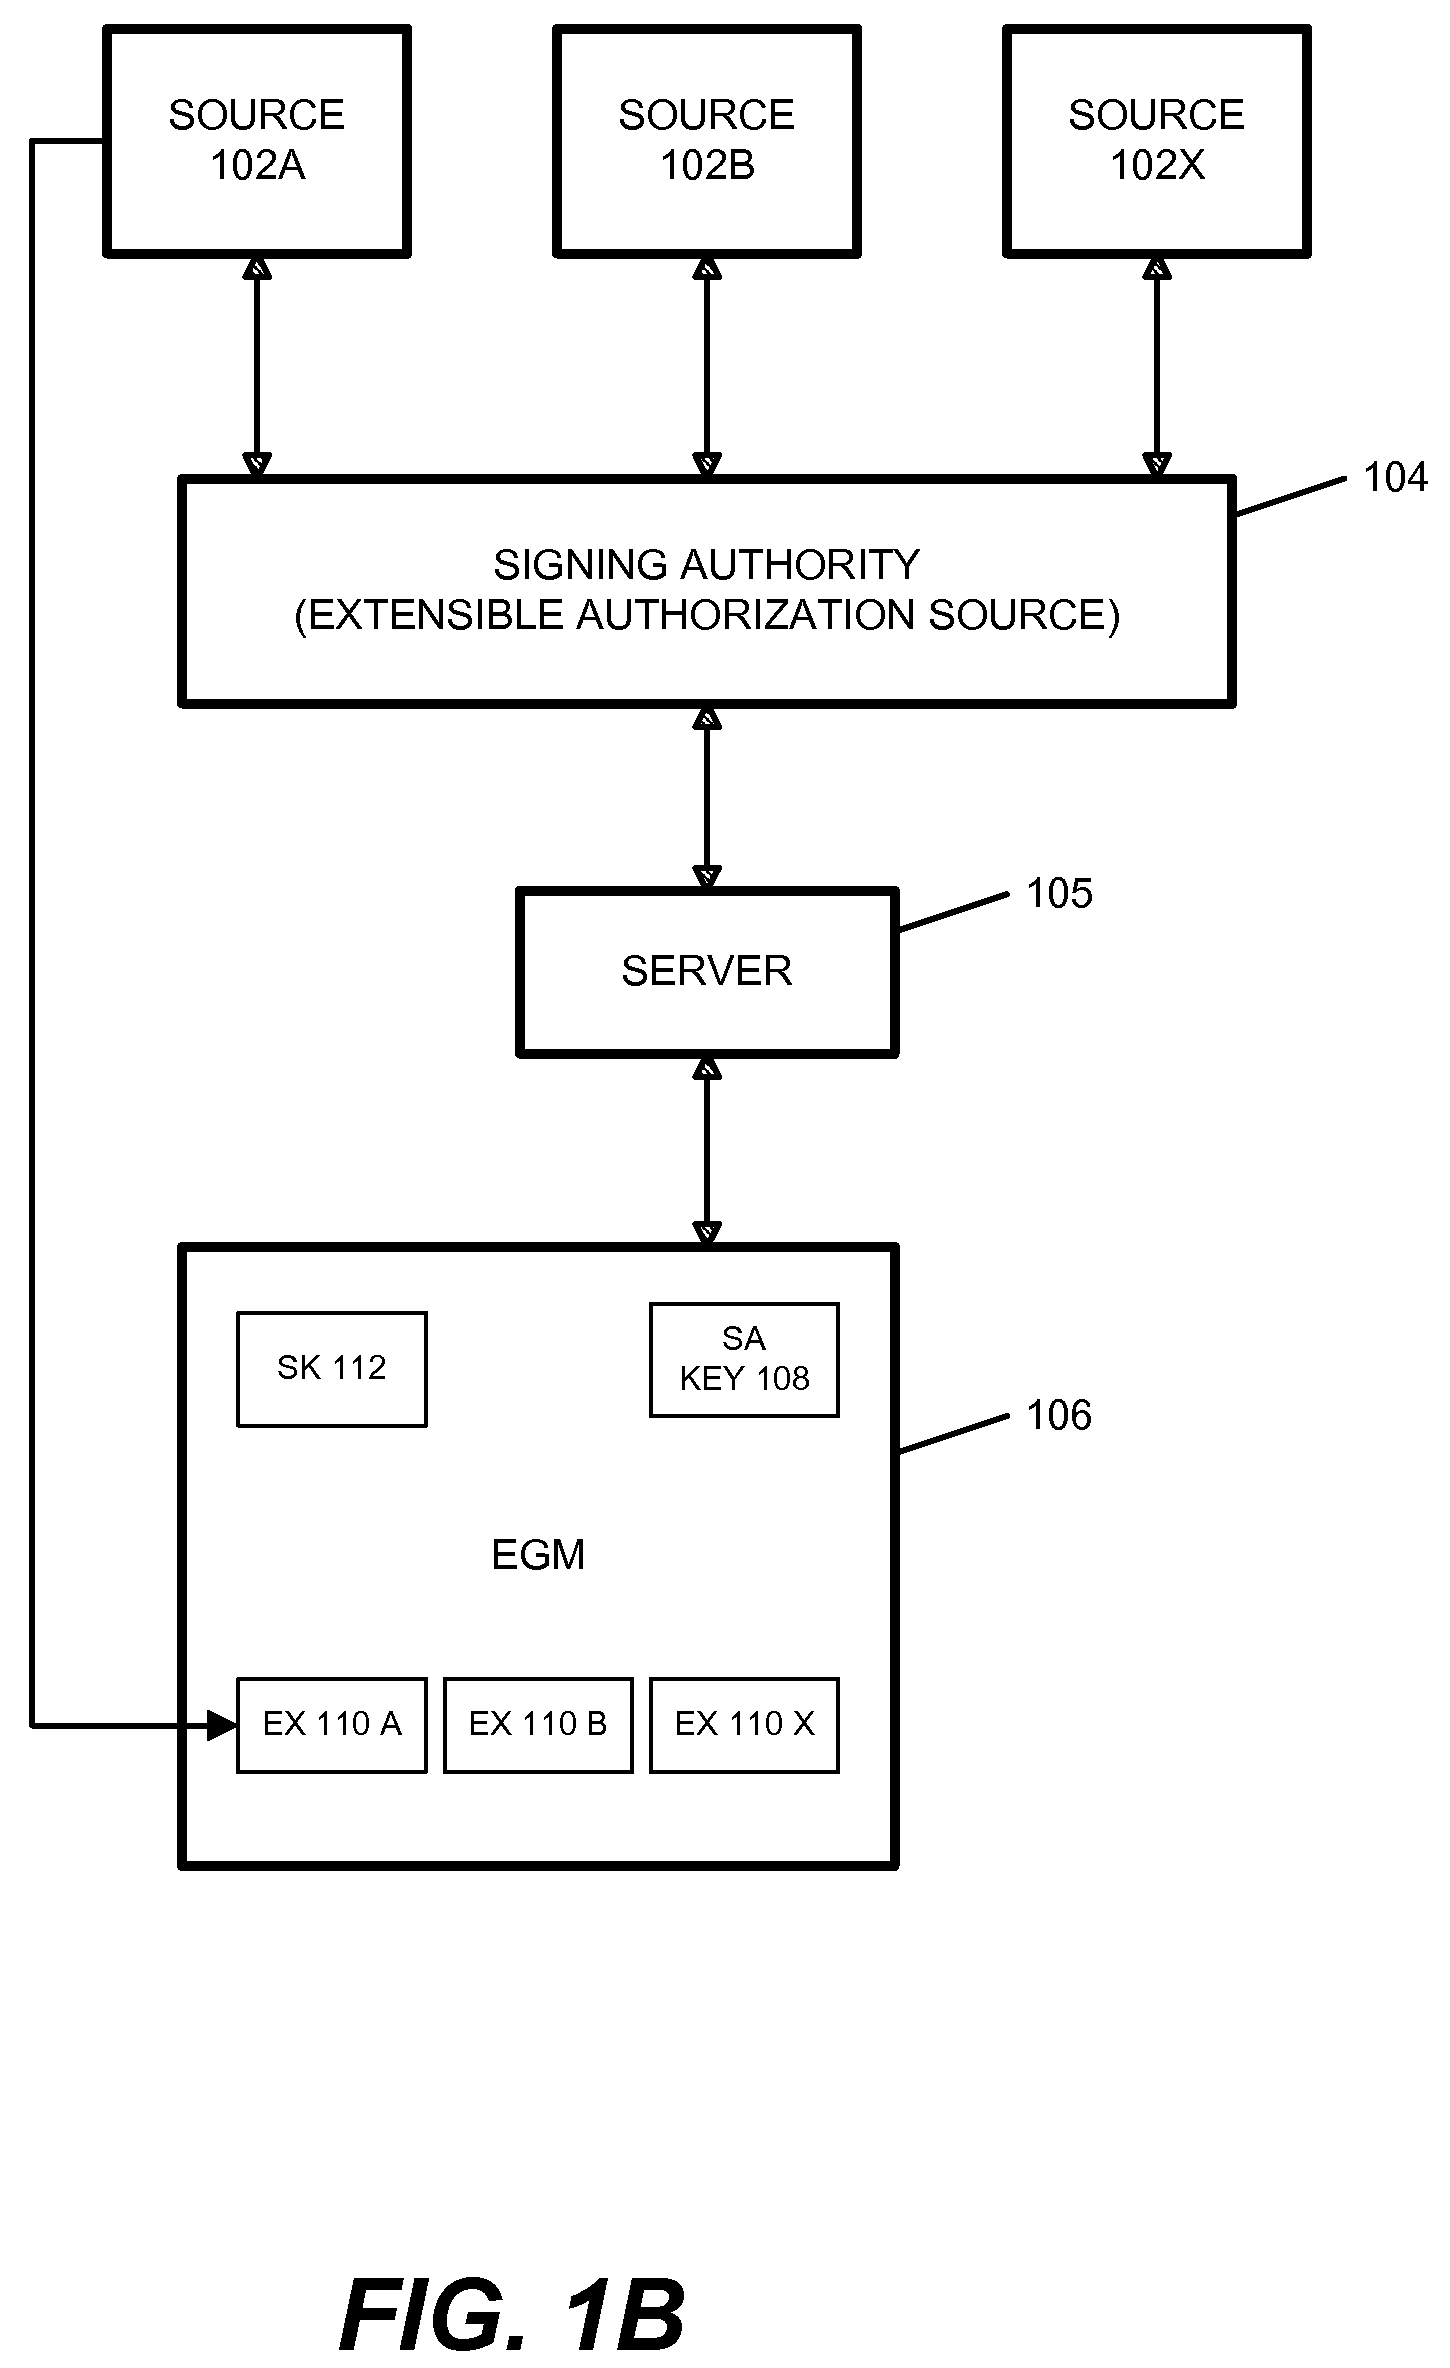 EGM authentication mechanism using multiple key pairs at the BIOS with PKI